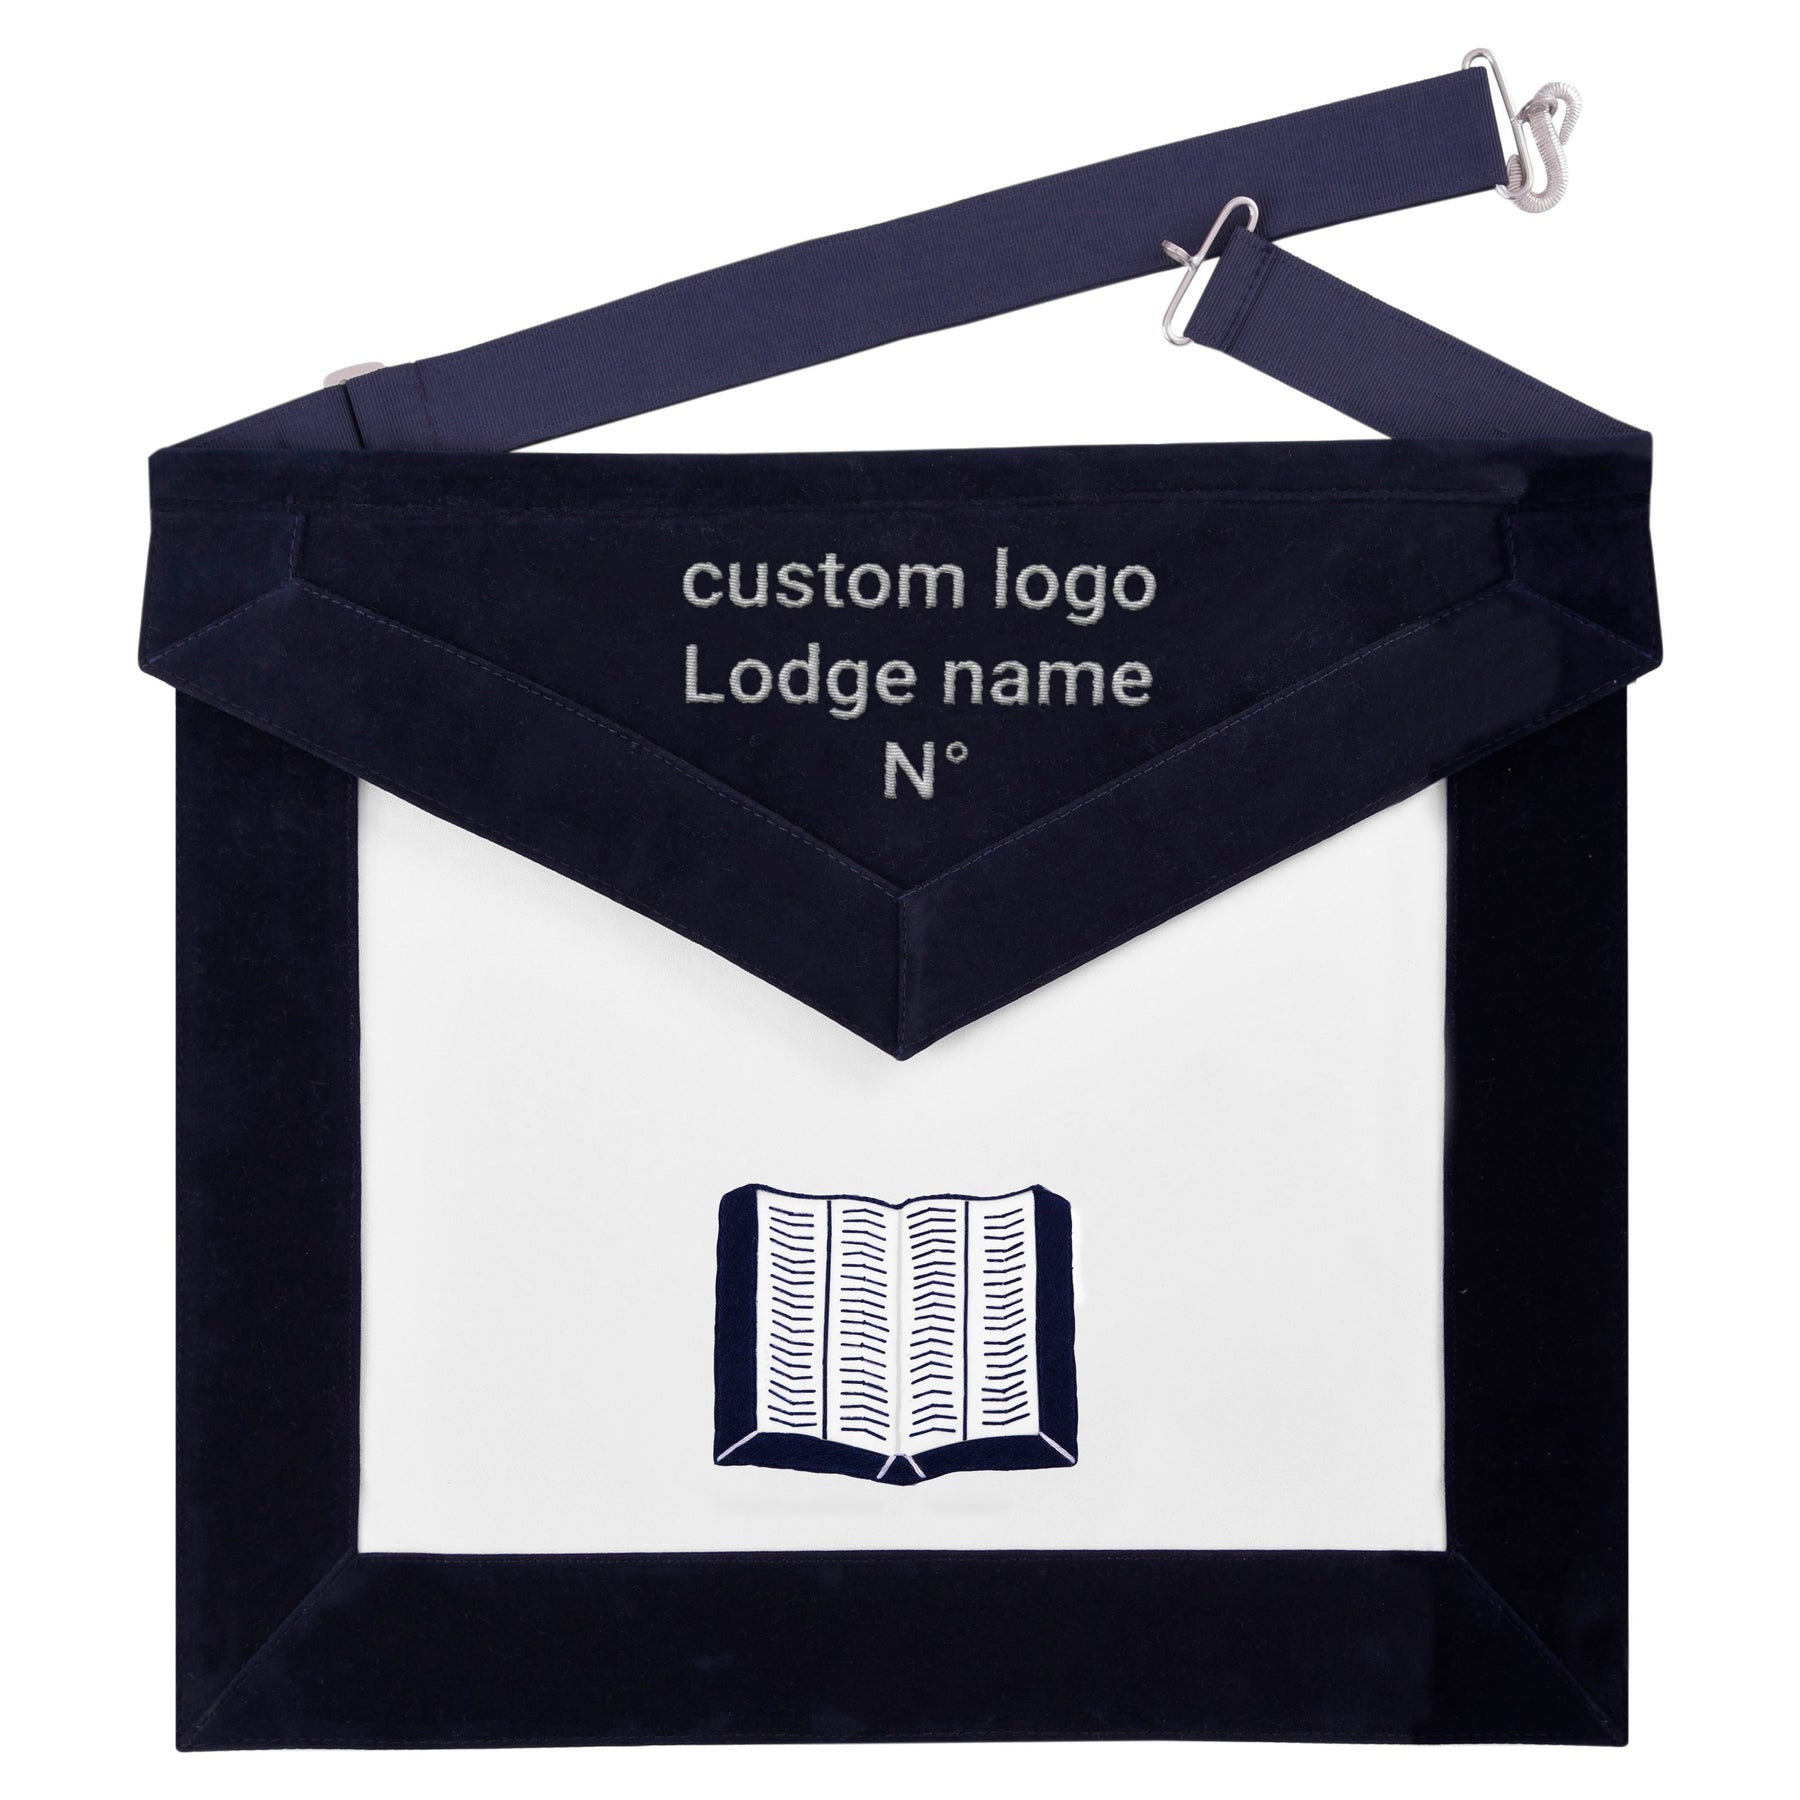 Chaplain Blue Lodge Officer Apron - Navy Velvet With Silver Embroidery Thread